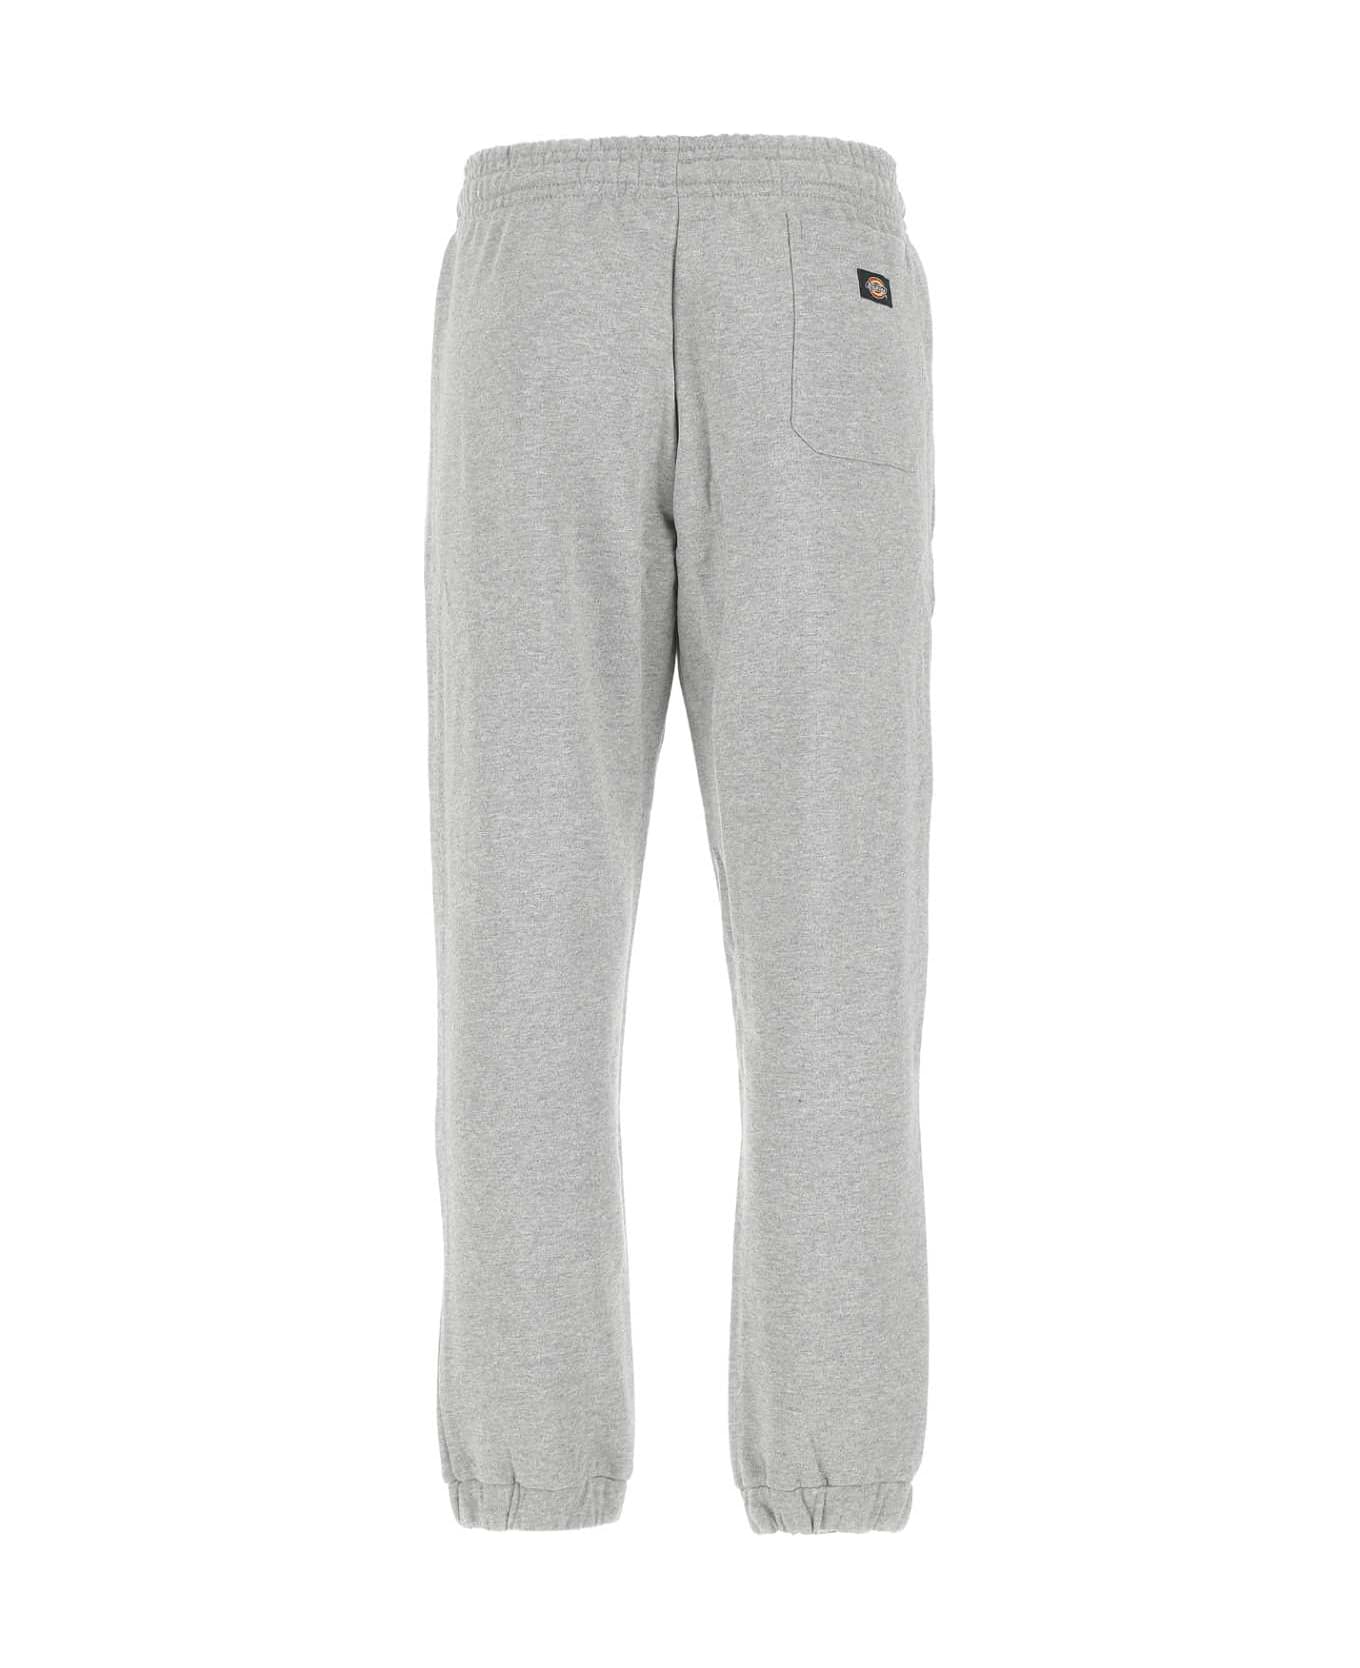 Dickies Grey Cotton Blend Bienville Joggers - GYM1 スウェットパンツ